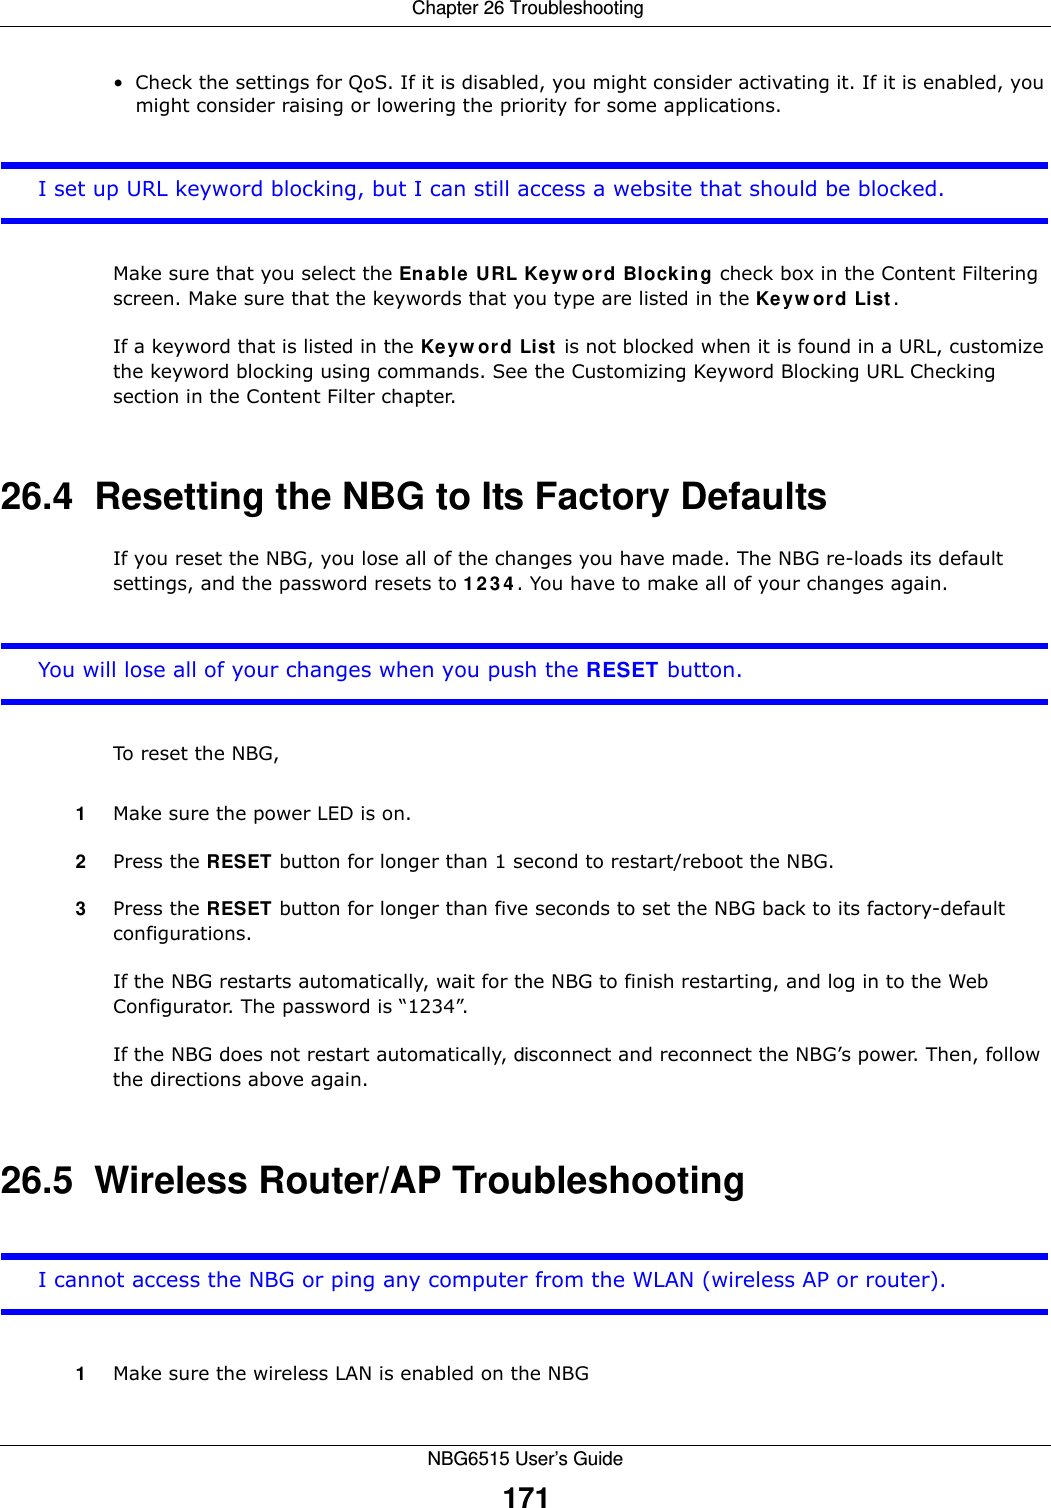  Chapter 26 TroubleshootingNBG6515 User’s Guide171• Check the settings for QoS. If it is disabled, you might consider activating it. If it is enabled, you might consider raising or lowering the priority for some applications.I set up URL keyword blocking, but I can still access a website that should be blocked.Make sure that you select the Enable URL Keyword Blocking check box in the Content Filtering screen. Make sure that the keywords that you type are listed in the Keyword List. If a keyword that is listed in the Keyword List is not blocked when it is found in a URL, customize the keyword blocking using commands. See the Customizing Keyword Blocking URL Checking section in the Content Filter chapter.26.4  Resetting the NBG to Its Factory Defaults If you reset the NBG, you lose all of the changes you have made. The NBG re-loads its default settings, and the password resets to 1234. You have to make all of your changes again.You will lose all of your changes when you push the RESET button.To reset the NBG,1Make sure the power LED is on.2Press the RESET button for longer than 1 second to restart/reboot the NBG.3Press the RESET button for longer than five seconds to set the NBG back to its factory-default configurations.If the NBG restarts automatically, wait for the NBG to finish restarting, and log in to the Web Configurator. The password is “1234”.If the NBG does not restart automatically, disconnect and reconnect the NBG’s power. Then, follow the directions above again.26.5  Wireless Router/AP TroubleshootingI cannot access the NBG or ping any computer from the WLAN (wireless AP or router).1Make sure the wireless LAN is enabled on the NBG